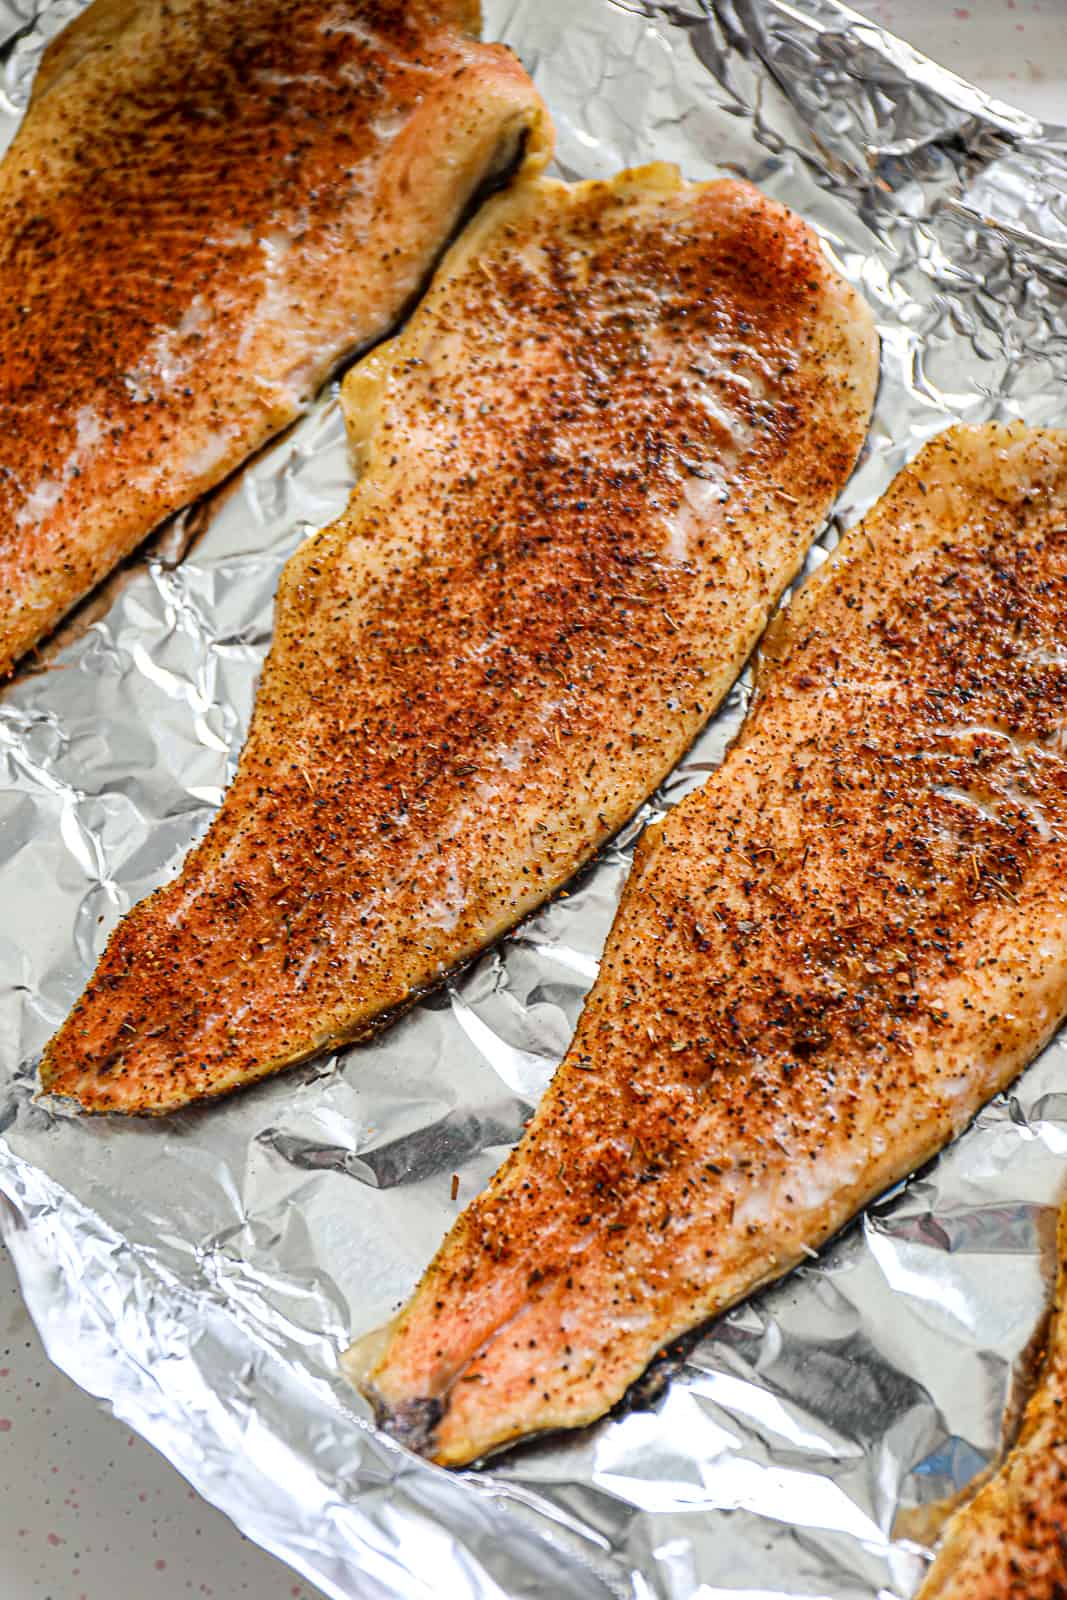 Traeger Smoked Trout Filets with Blackening Seasoning Sip Bite Go